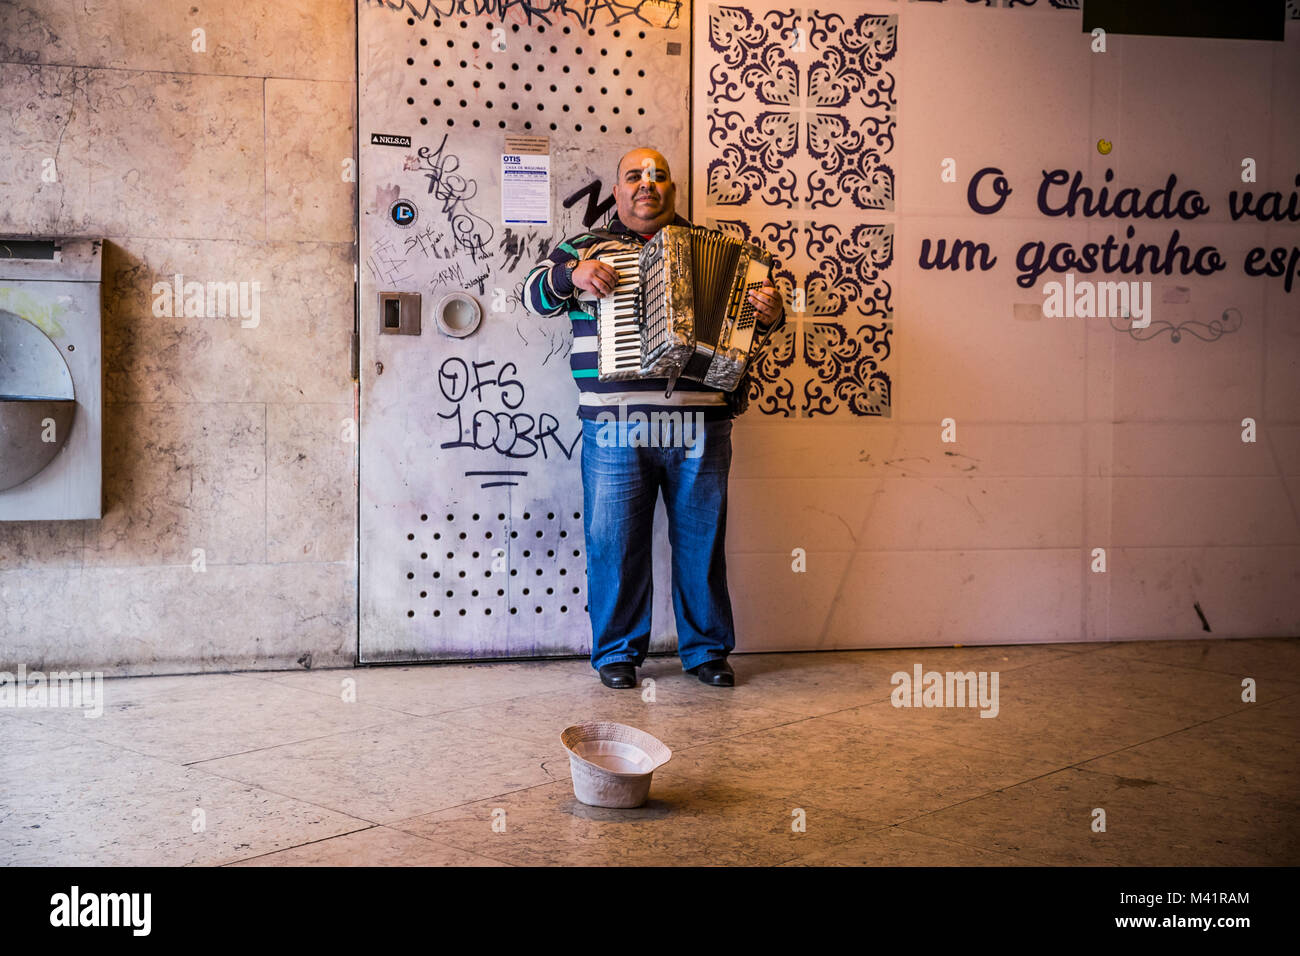 A metro station busker in Lisbon, Portugal. Stock Photo